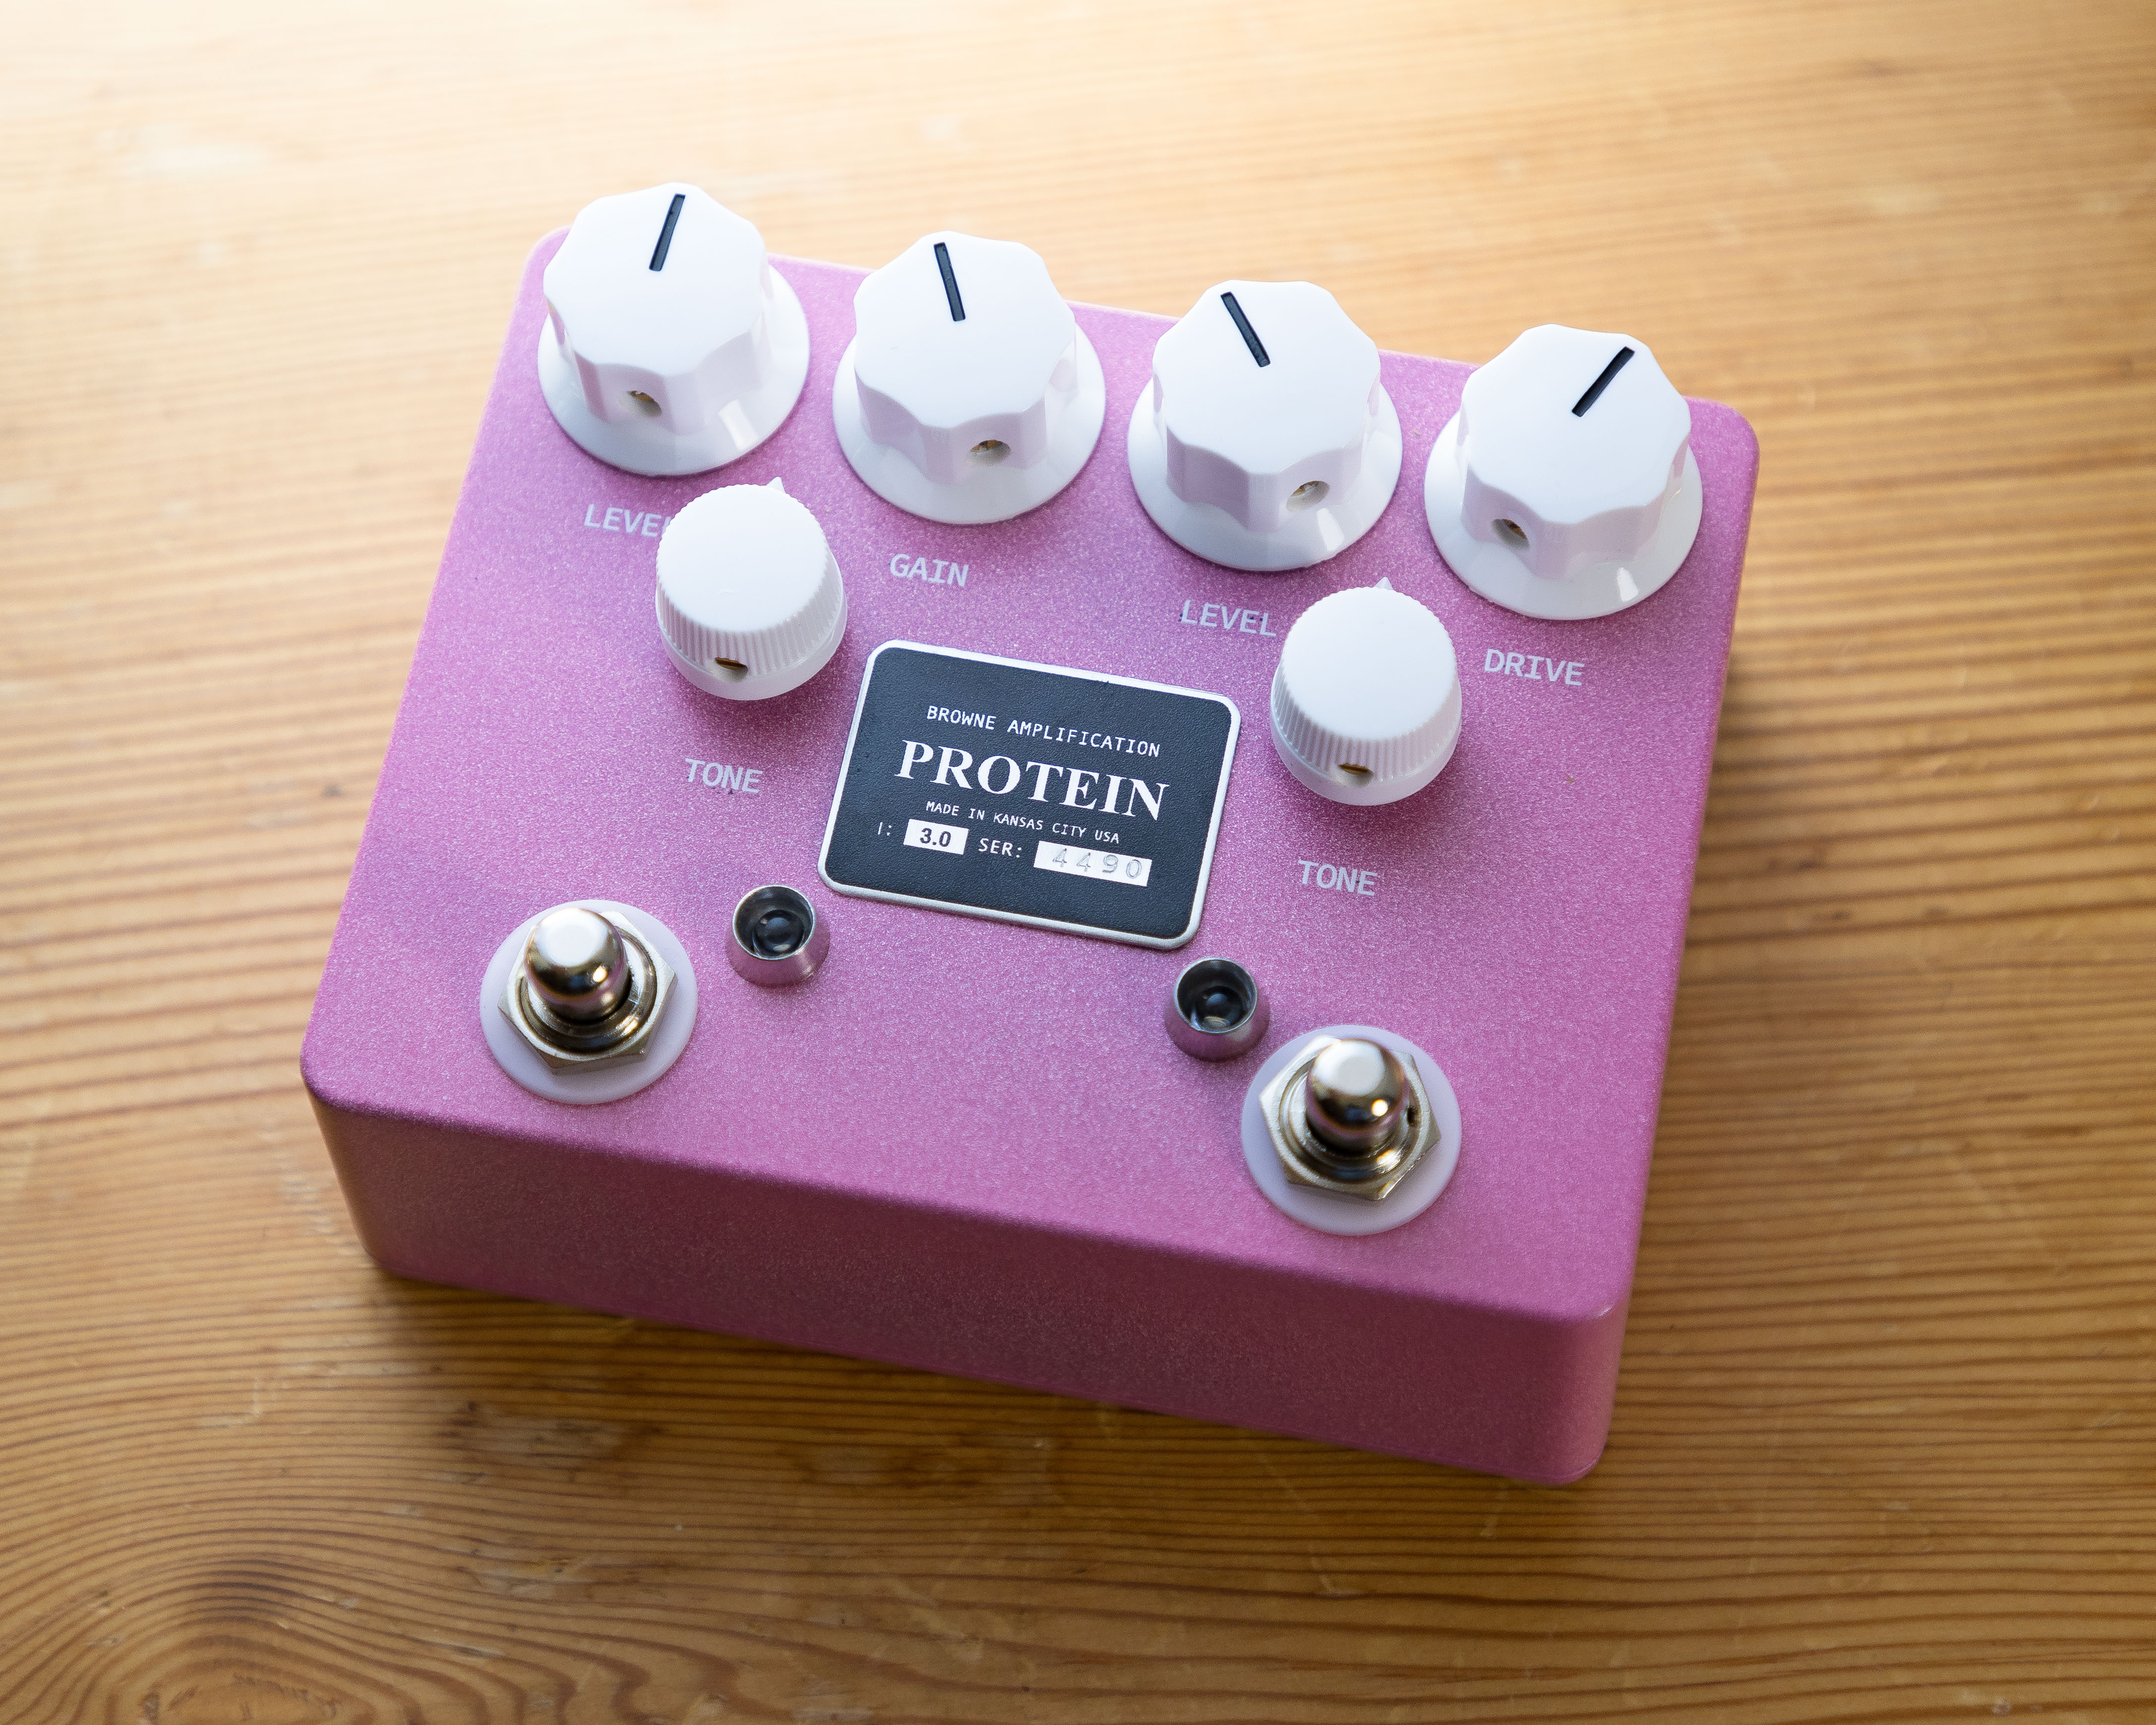 Browne Amplification - Protein Dual Overdrive V3 - Pink and White